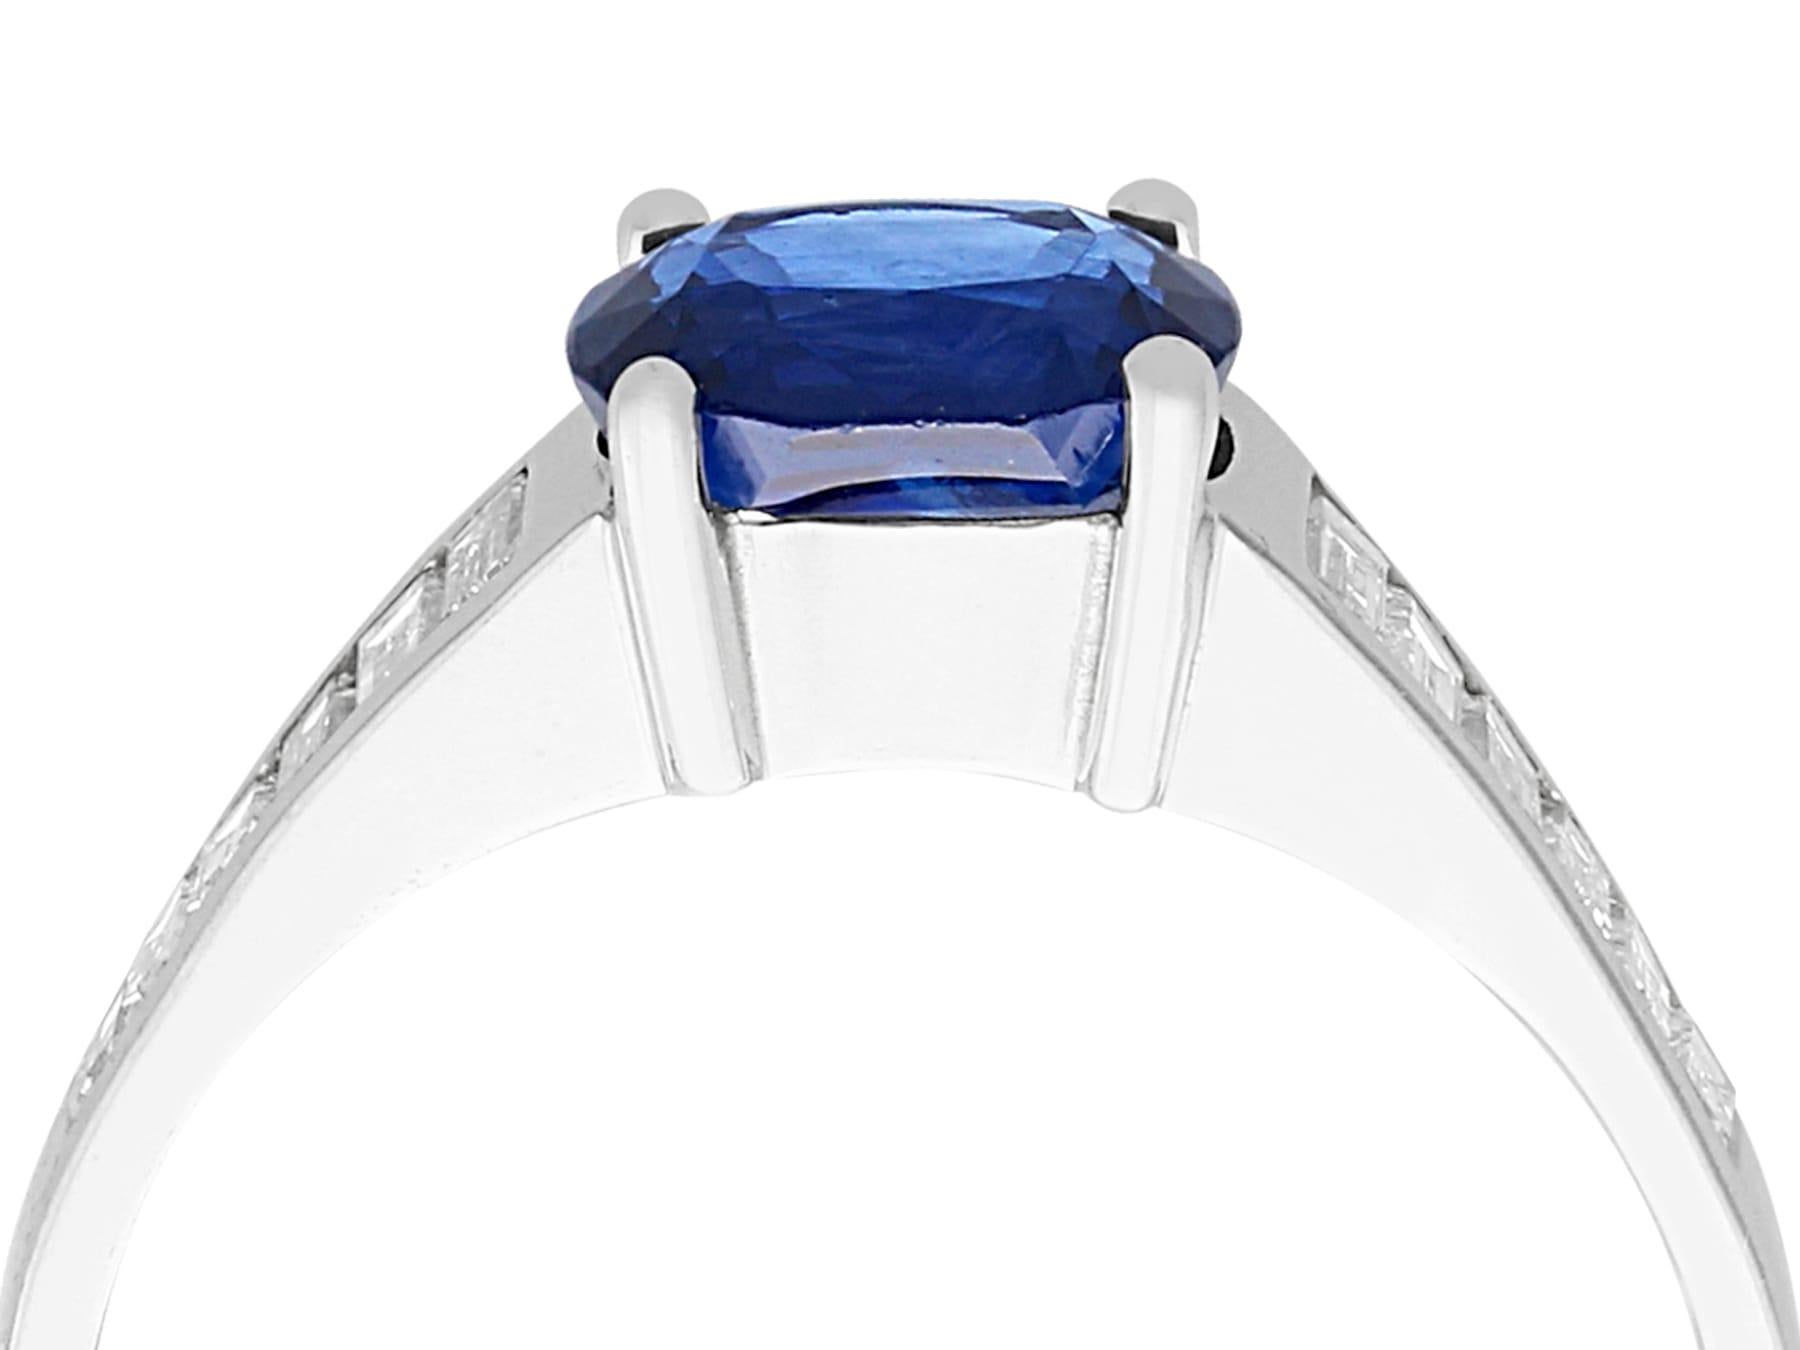 1990s 1.20 Carat Oval Cut Sapphire Diamond White Gold Cocktail Ring In Excellent Condition For Sale In Jesmond, Newcastle Upon Tyne